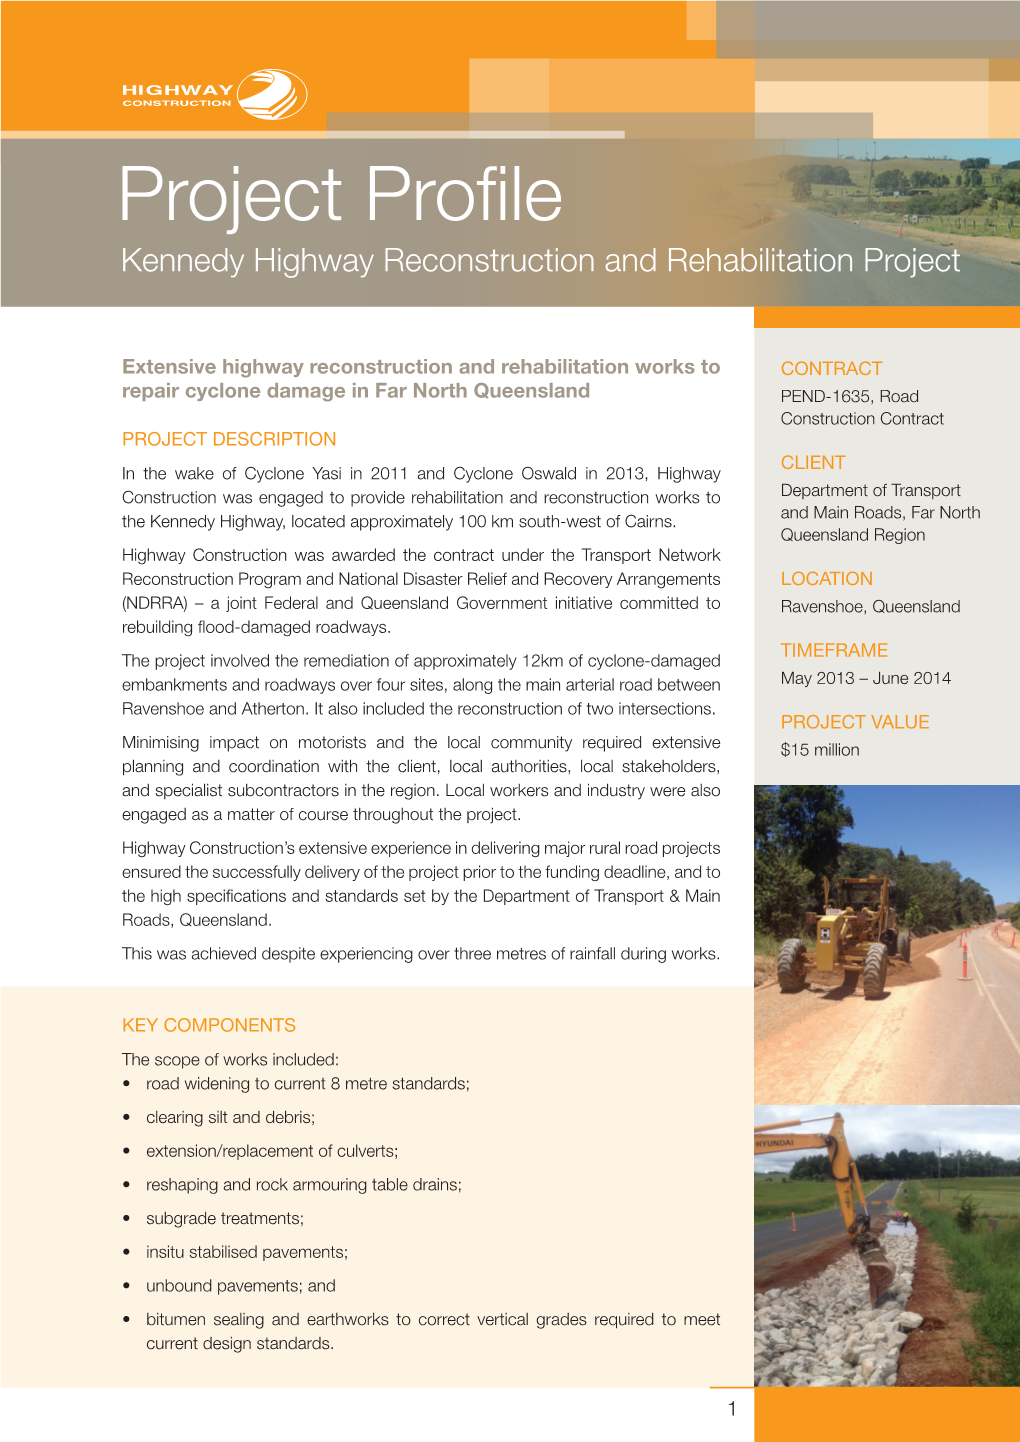 Project Profile Kennedy Highway Reconstruction and Rehabilitation Project